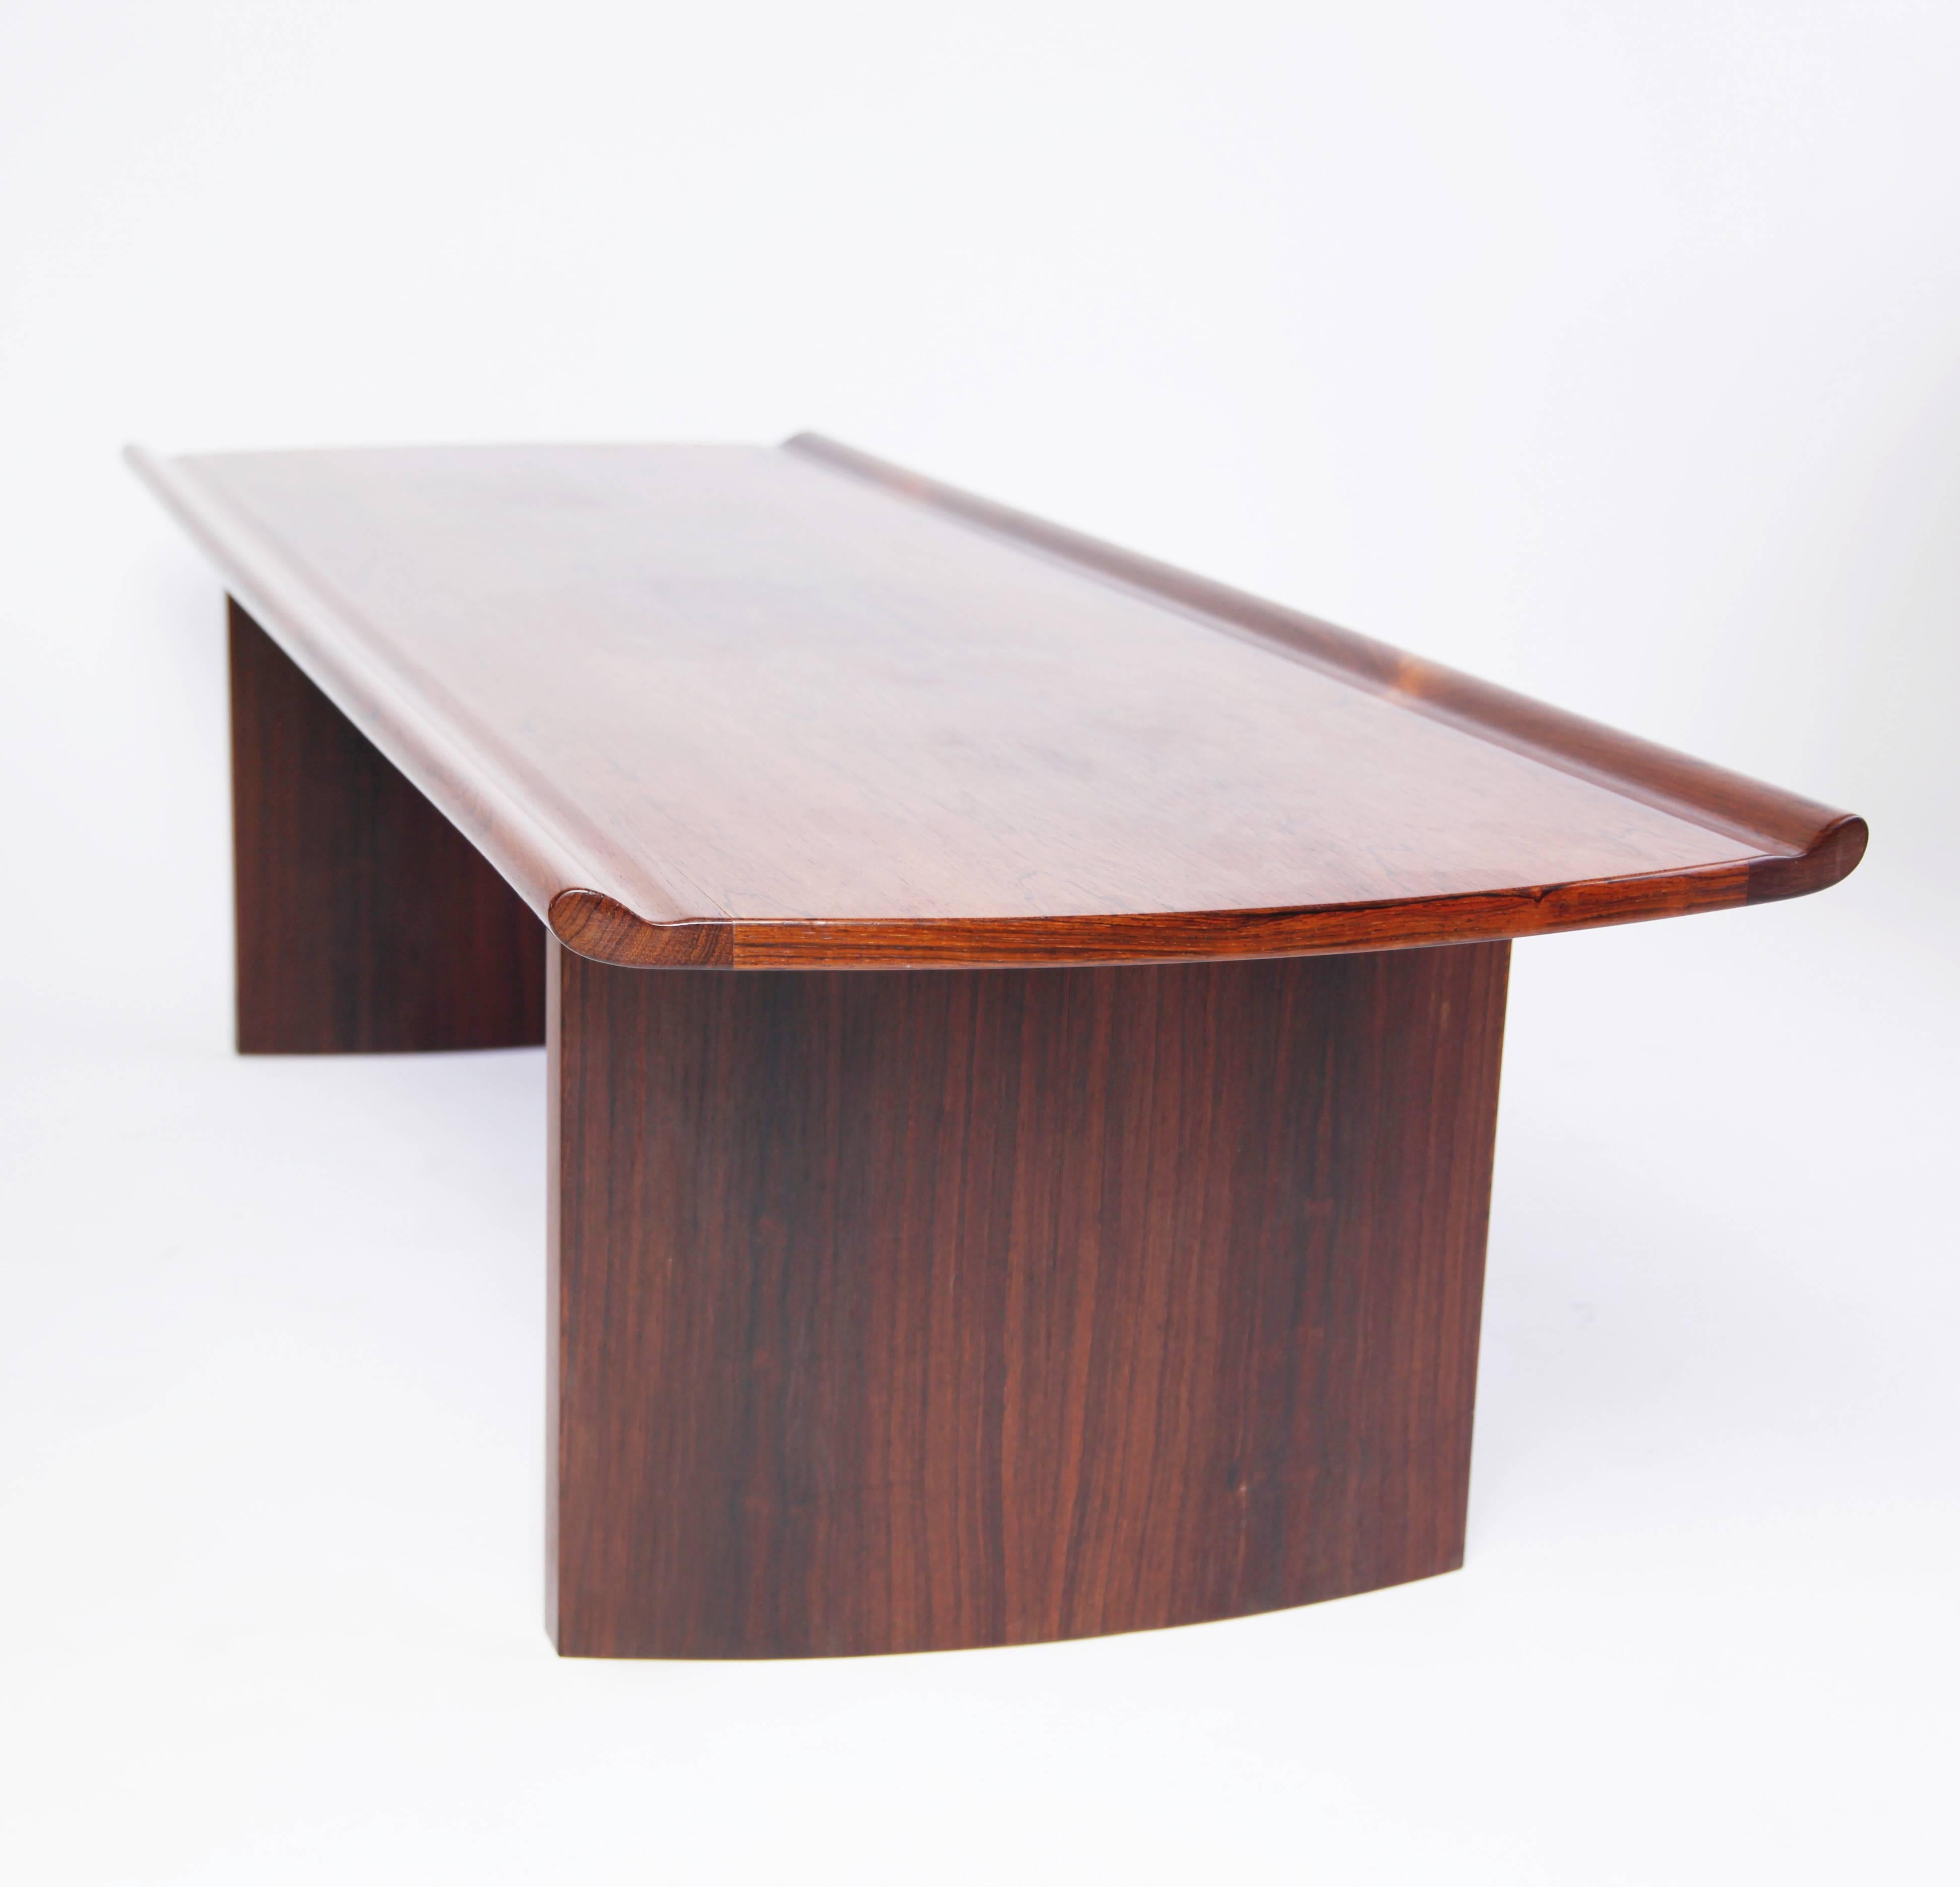 The top of this coffee table is solid rosewood, with an unexpected upward sweep. The legs are veneered rosewood, gently curving outward. A dramatic design, streamlined and modern, with an almost Japanese sensibility.